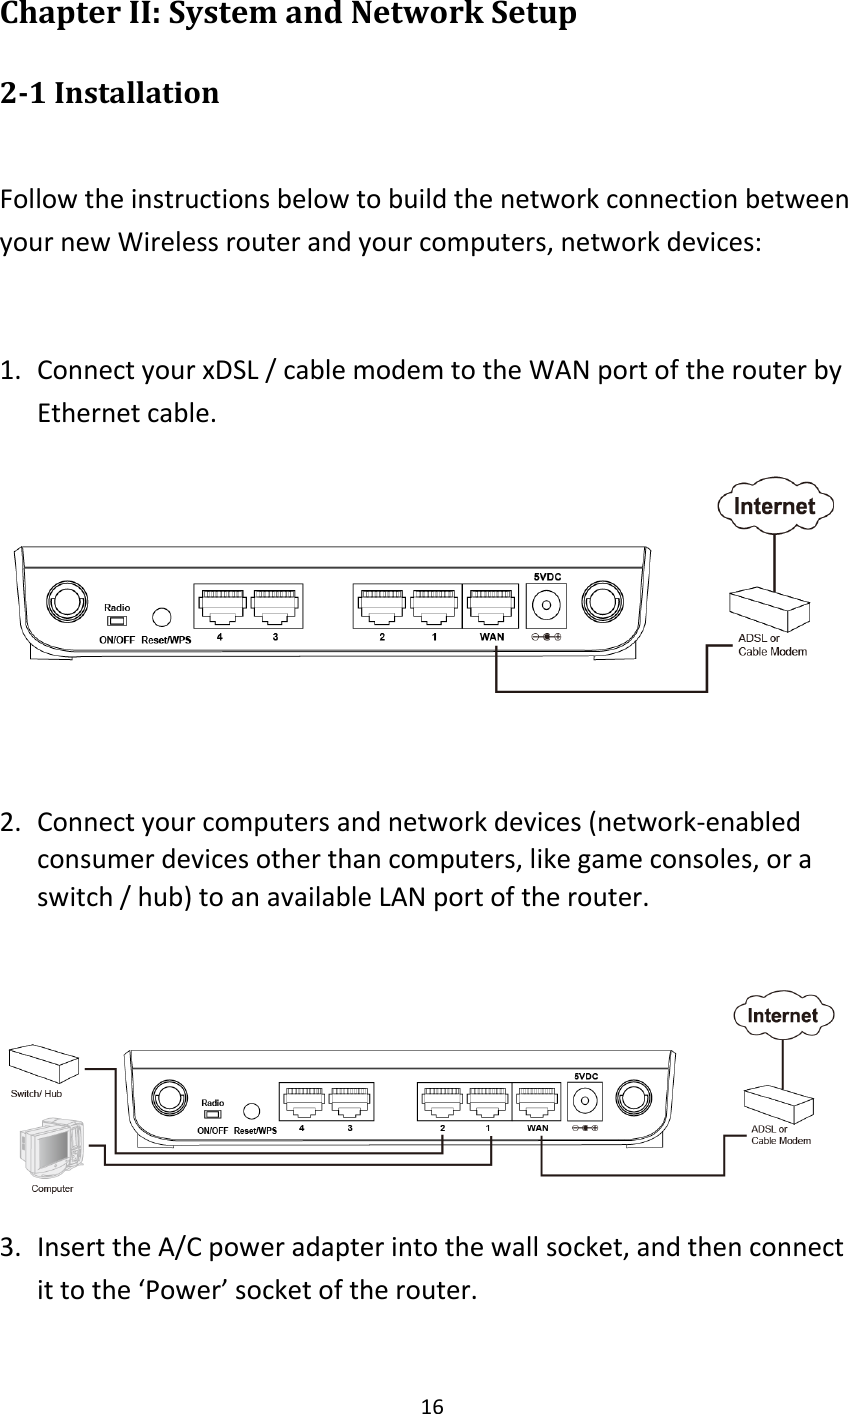 16 Chapter II: System and Network Setup 2-1 Installation  Follow the instructions below to build the network connection between your new Wireless router and your computers, network devices:  1. Connect your xDSL / cable modem to the WAN port of the router by Ethernet cable.     2. Connect your computers and network devices (network-enabled consumer devices other than computers, like game consoles, or a switch / hub) to an available LAN port of the router.   3. Insert the A/C power adapter into the wall socket, and then connect it to the ‘Power’ socket of the router. 